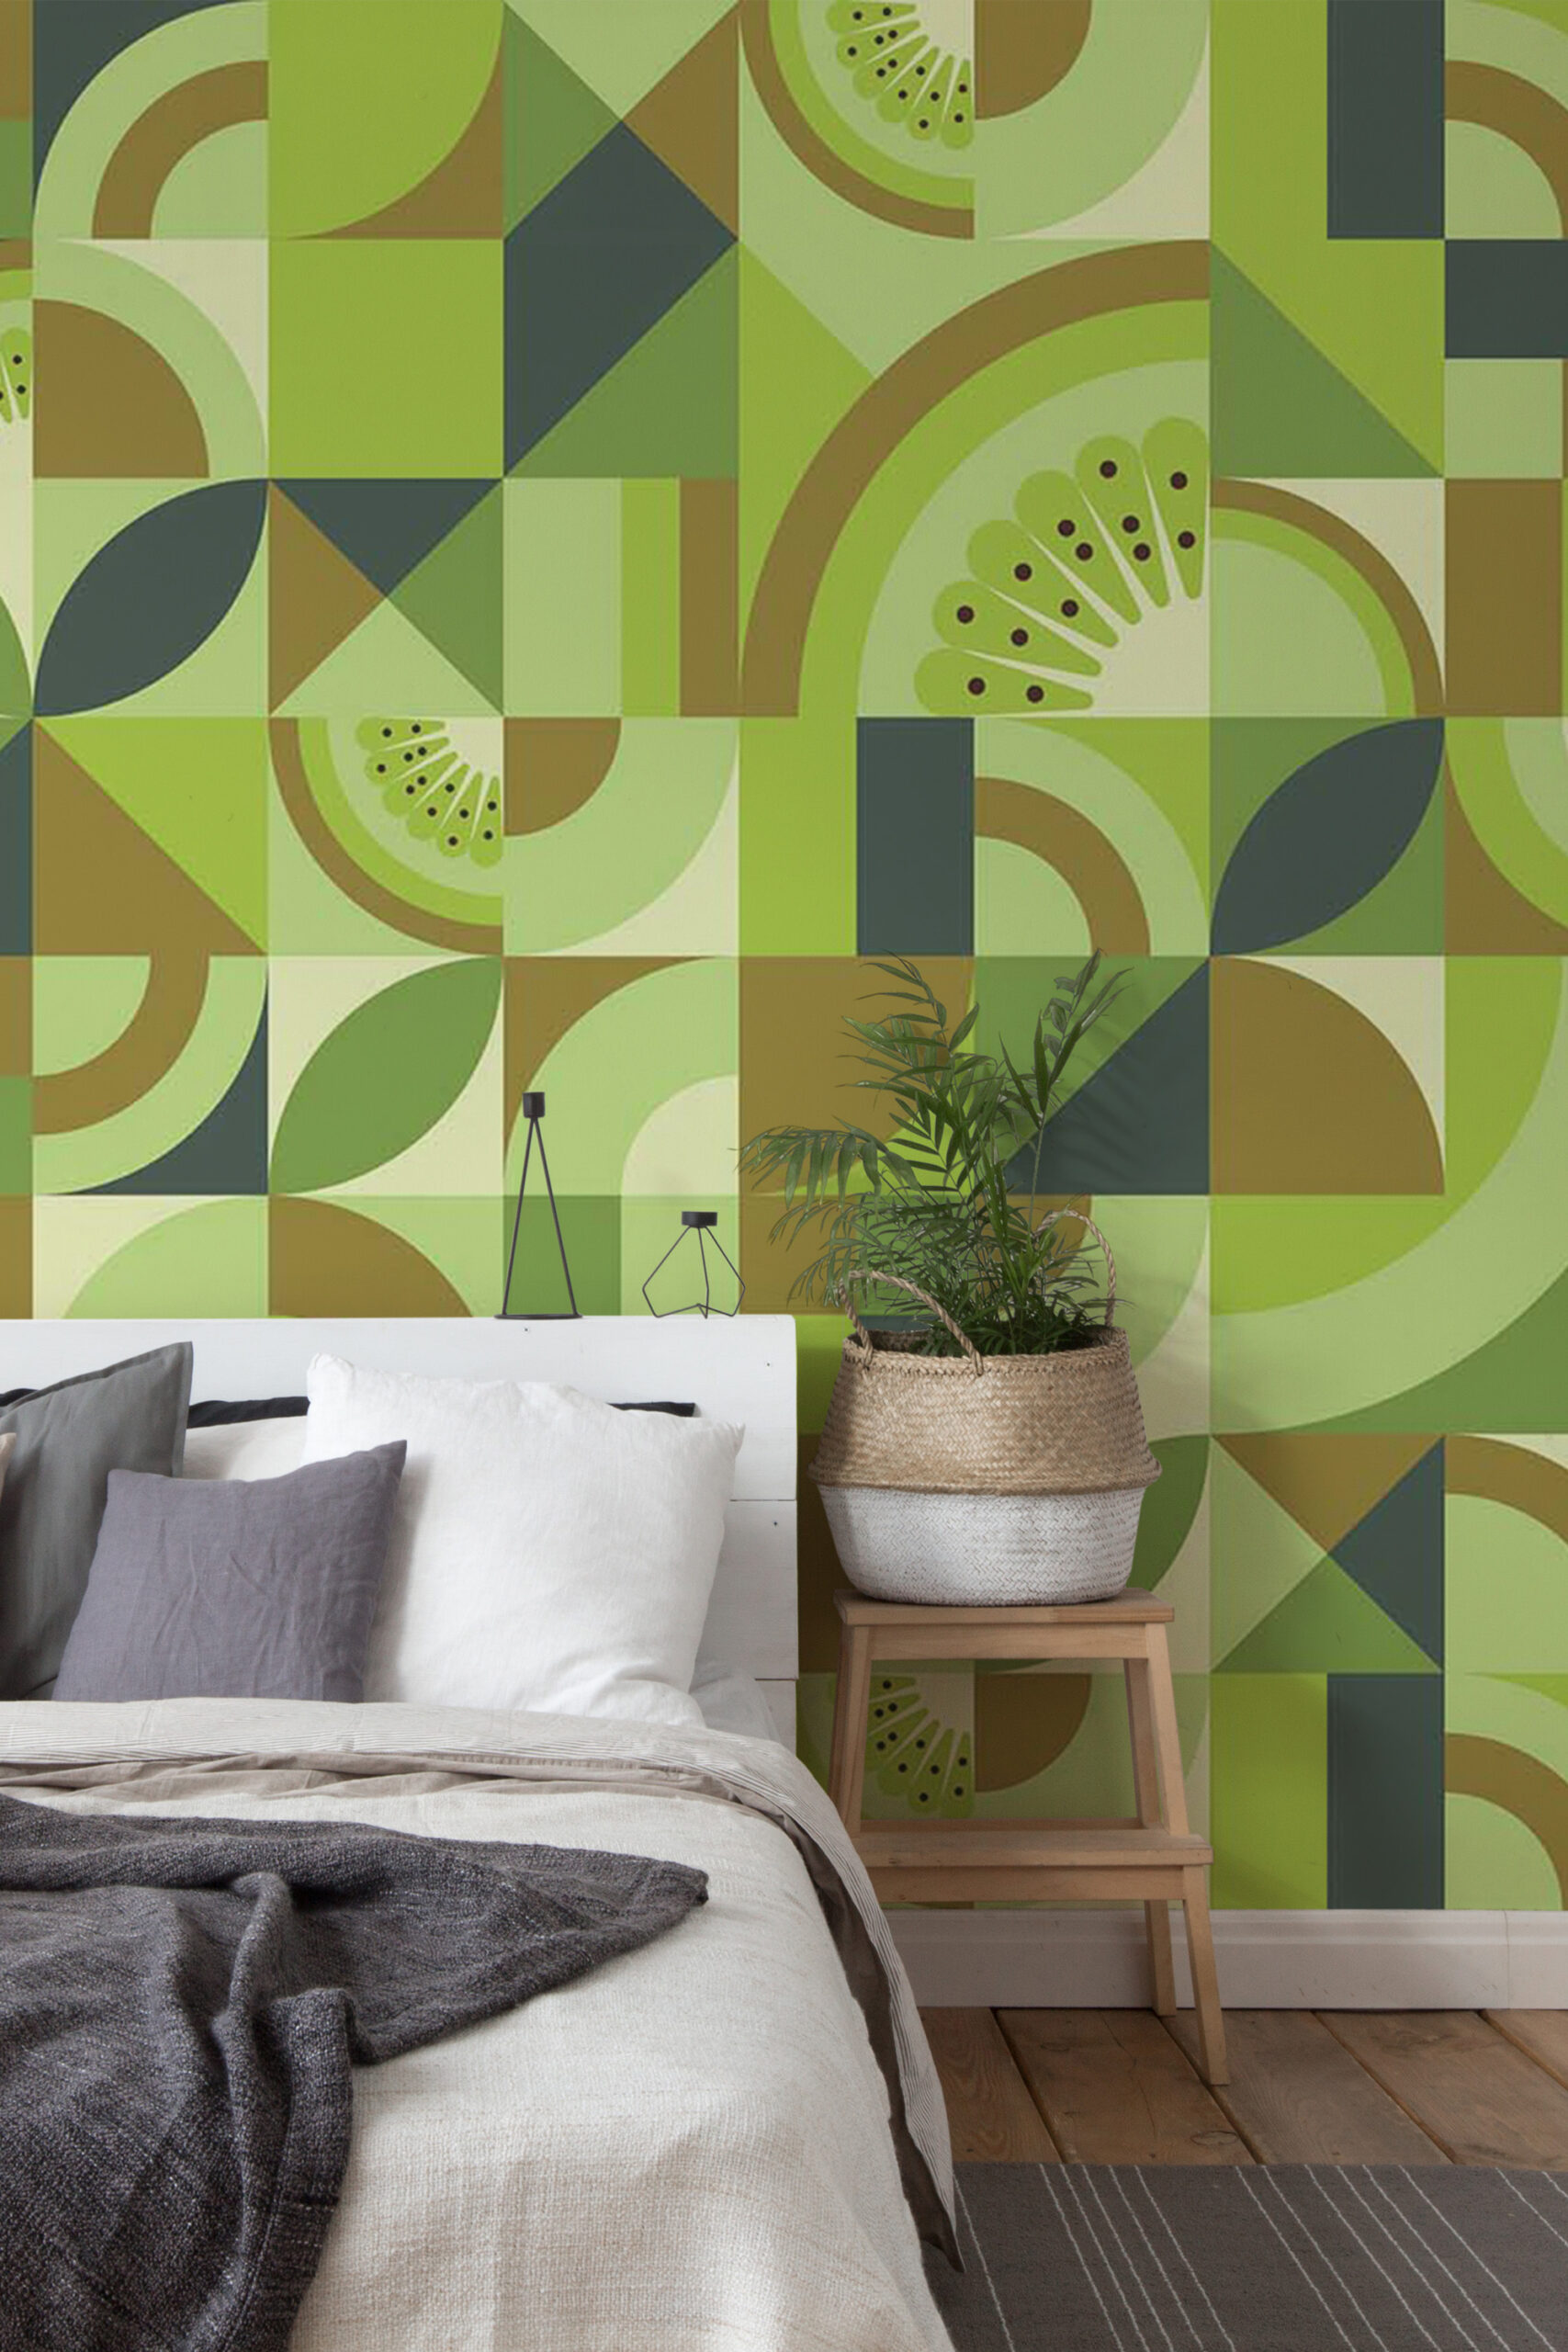 Retro Green Kiwi Design by Fancy Walls Wall Mural Peel and Stick